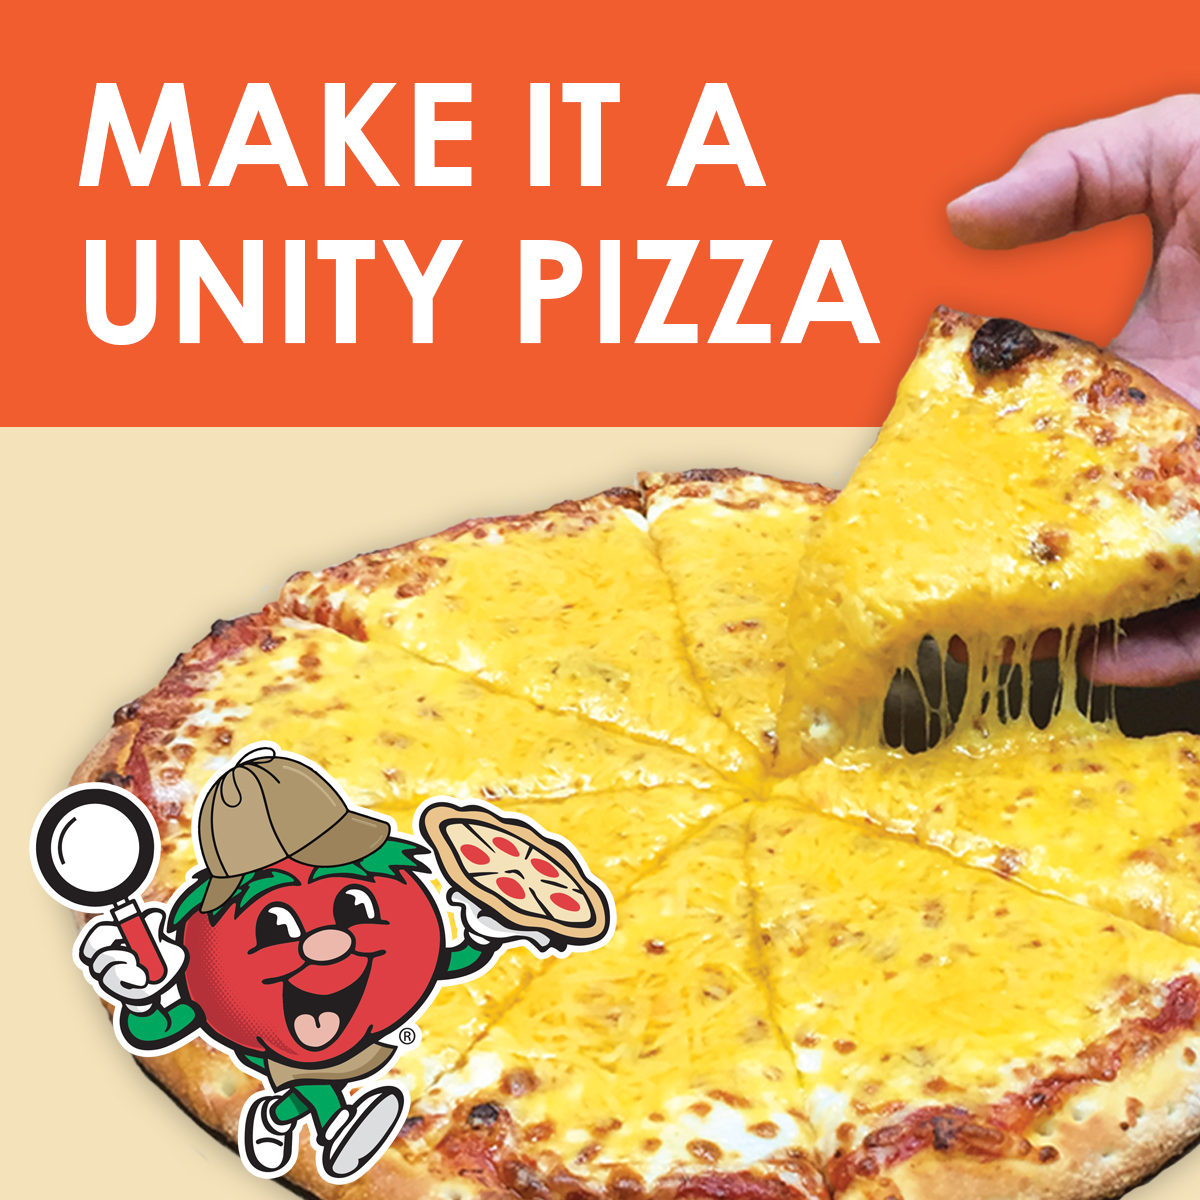 Image One – Unity Pizza – Snappy Tomato Pizza
Support National Bullying Prevention Month and celebrate National Pizza Month with us! Donate $1 to make any round medium or large Snappy Tomato Pizza a Unity Pizza.  We’ll add cheddar cheese to represent the color of Unity Day and your $1 will be donated to PACER’s National Bullying Prevention Center. “Add Cheddar and Make It Better”
Visit SnappyTomato.com/UnityPizza for more information. 
#SnappyTomato  #SnappyAgentofChange  #AgentofChangeEducator
